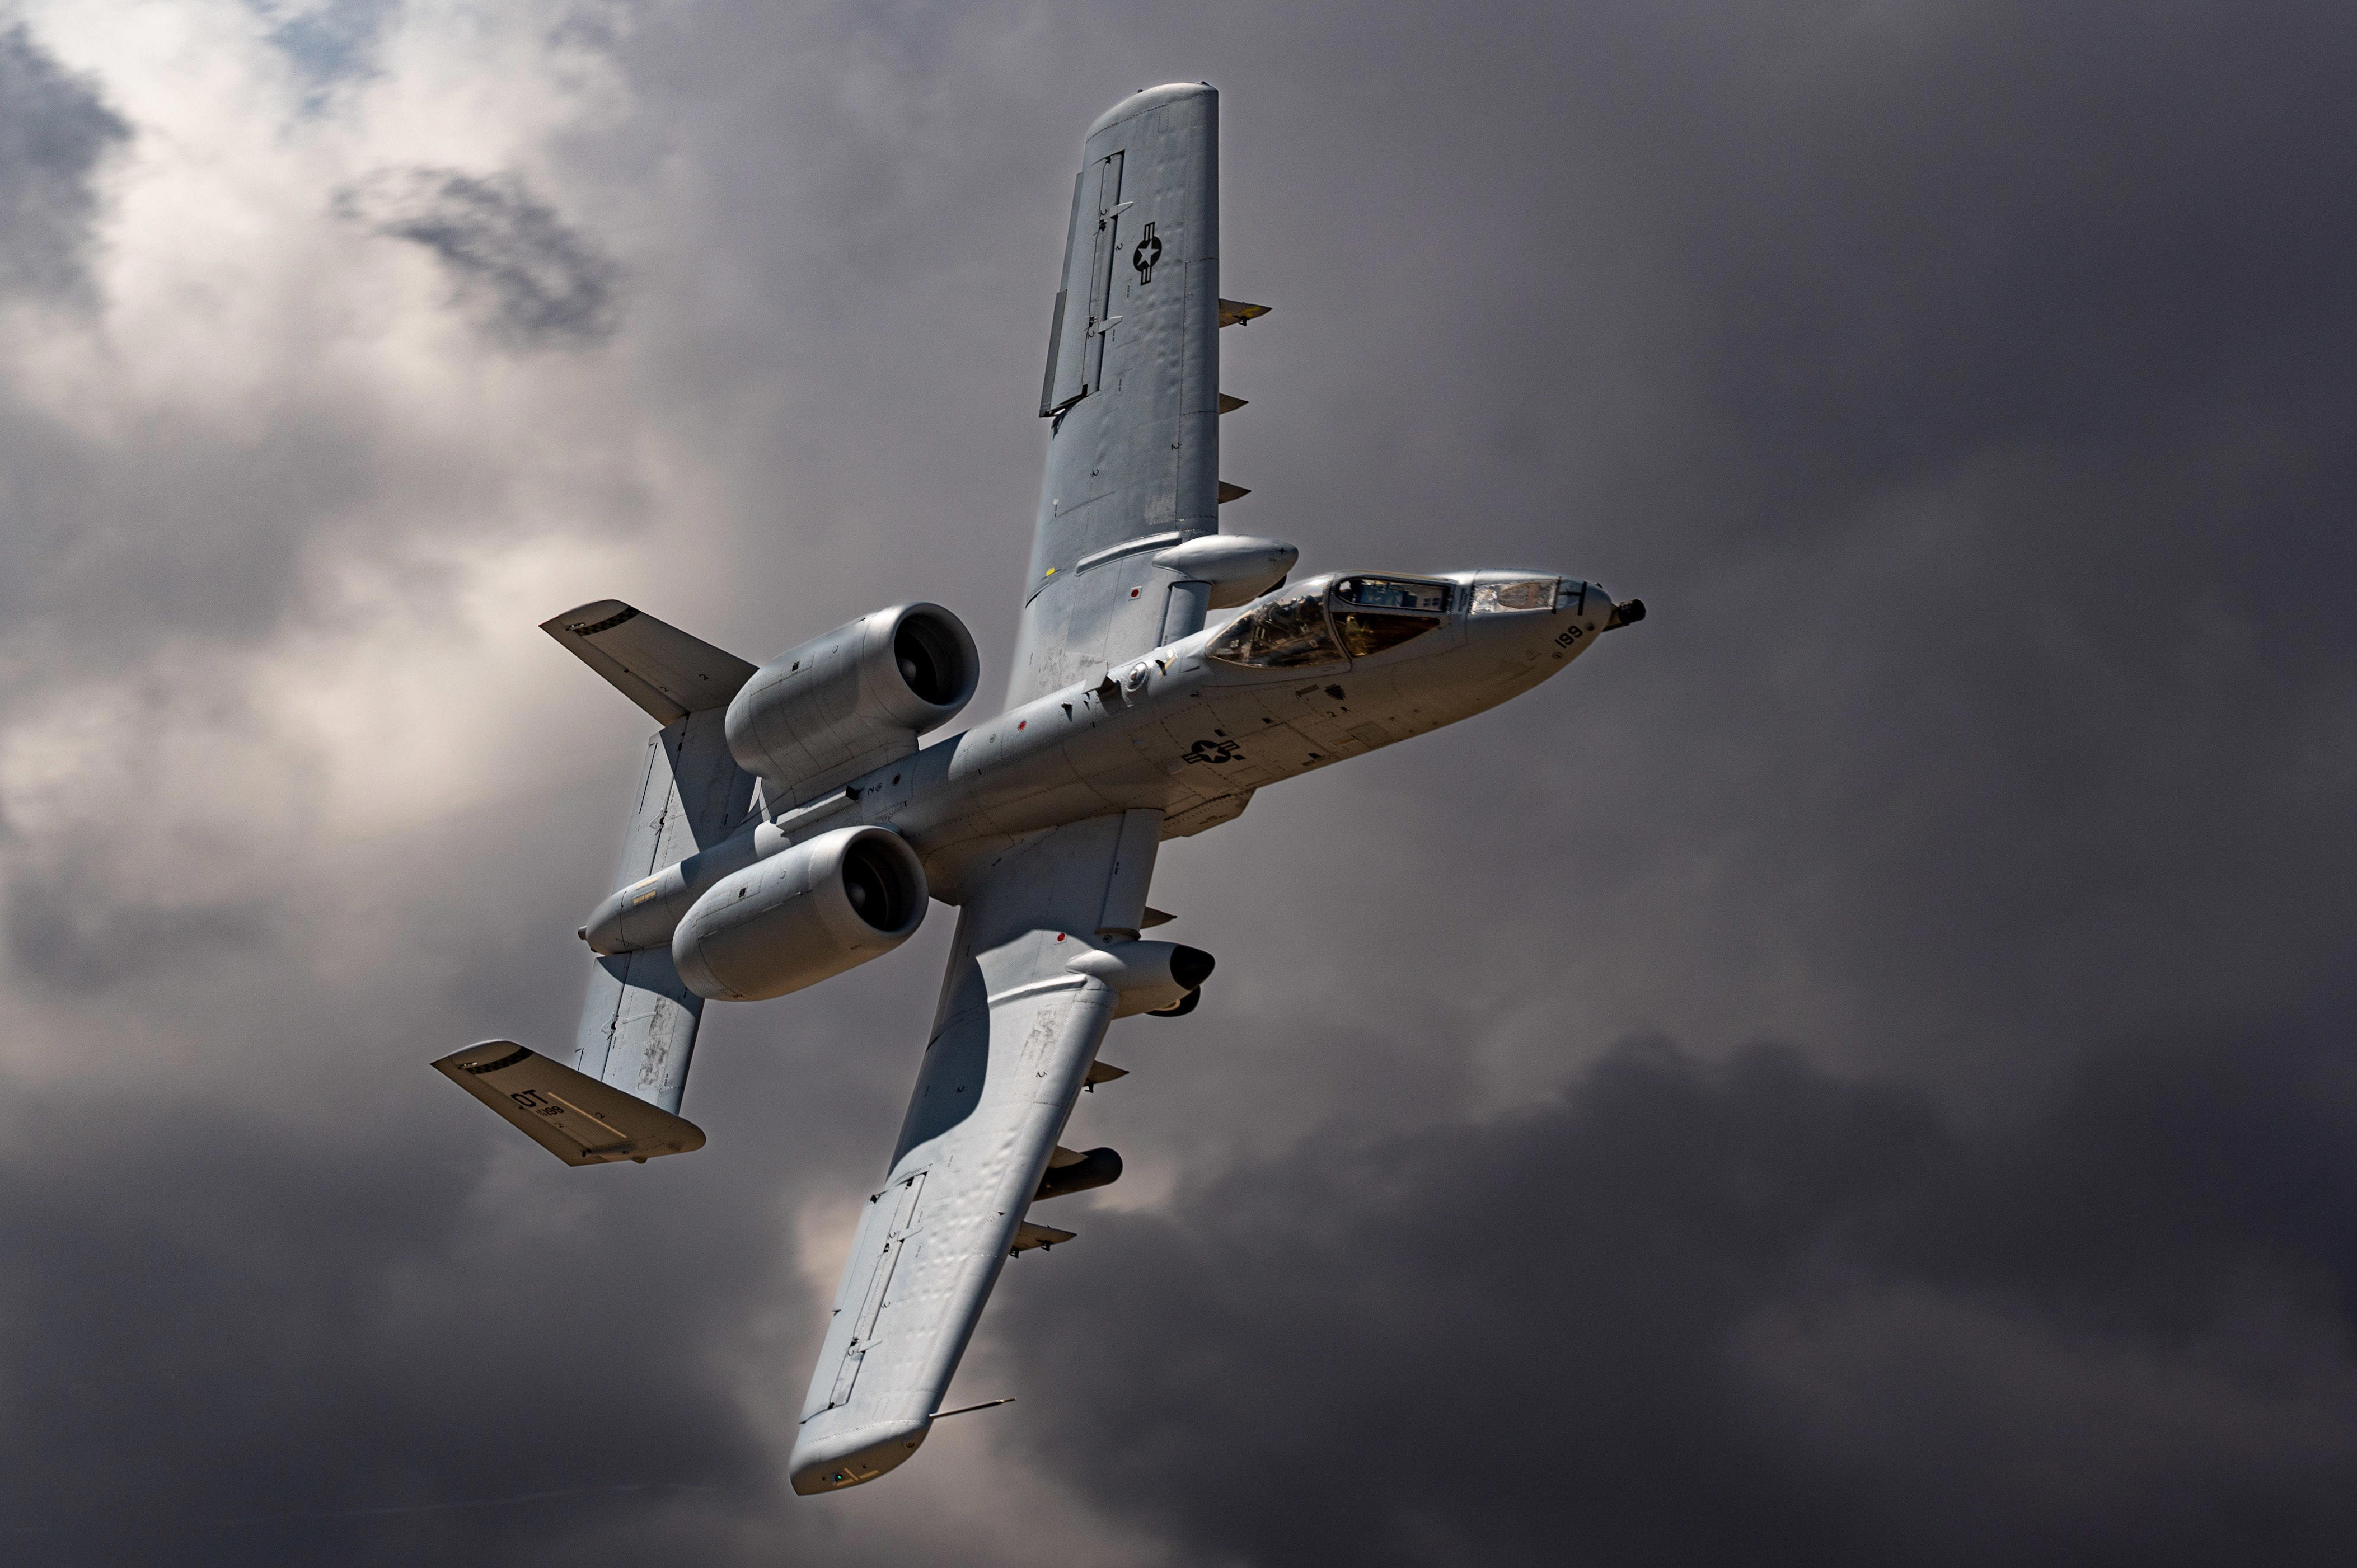 first us air force wing to get operational a-10 attack aircraft nearly 50 years ago starts sending its warthogs to the boneyard